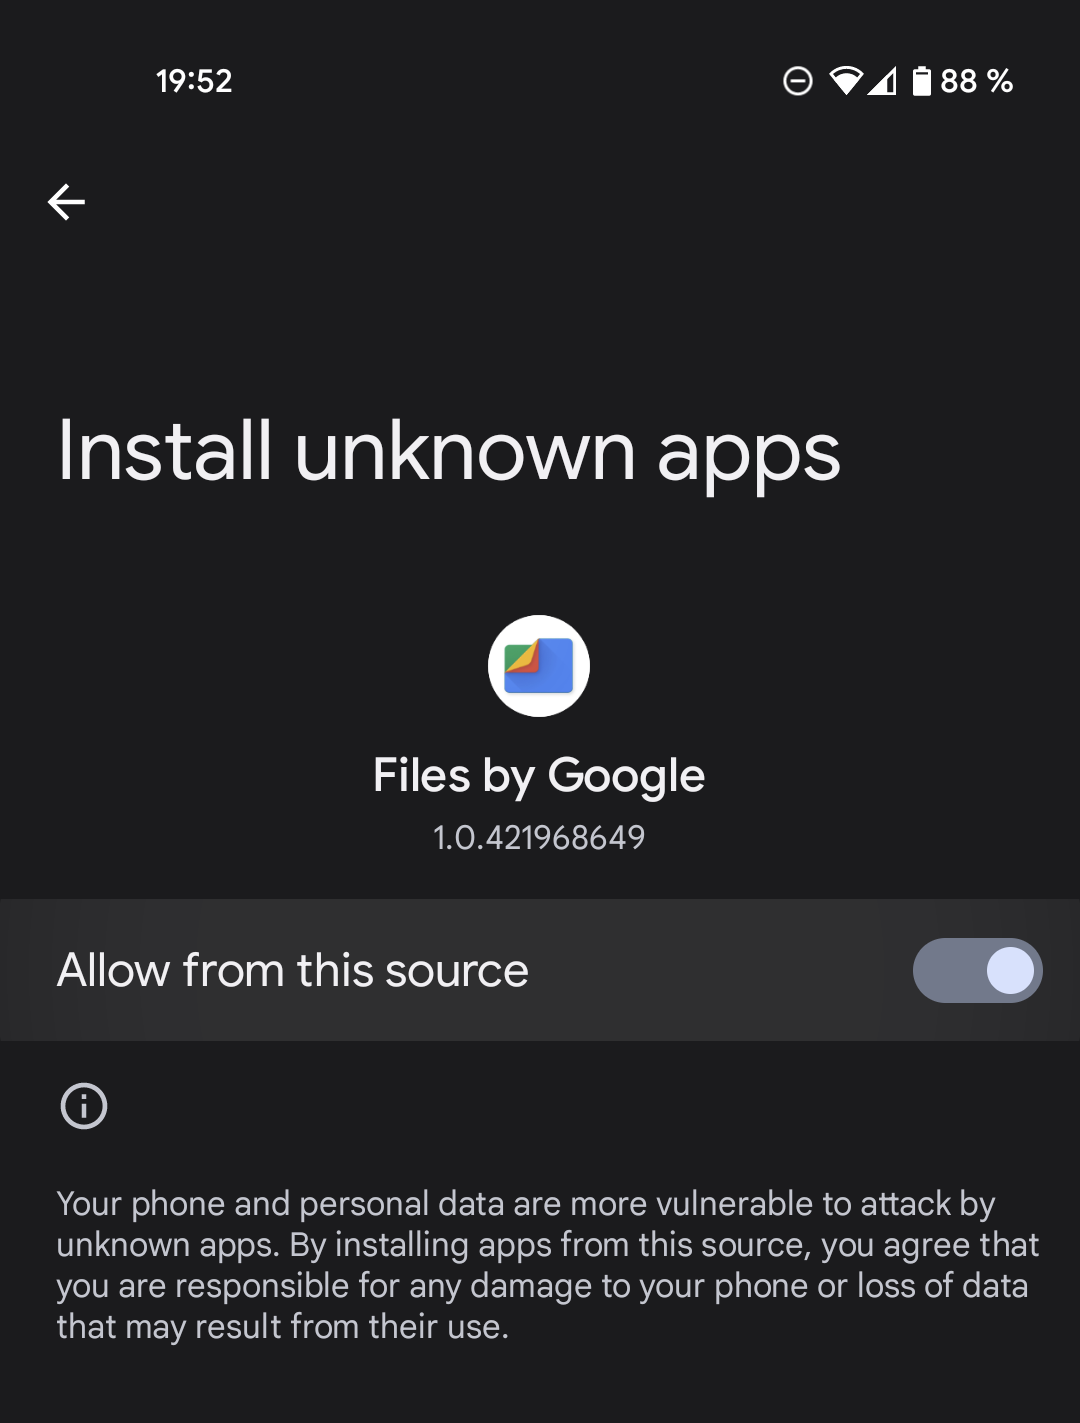 Screenshot of an Android phone showing the setting to allow installing apps from an unknown source